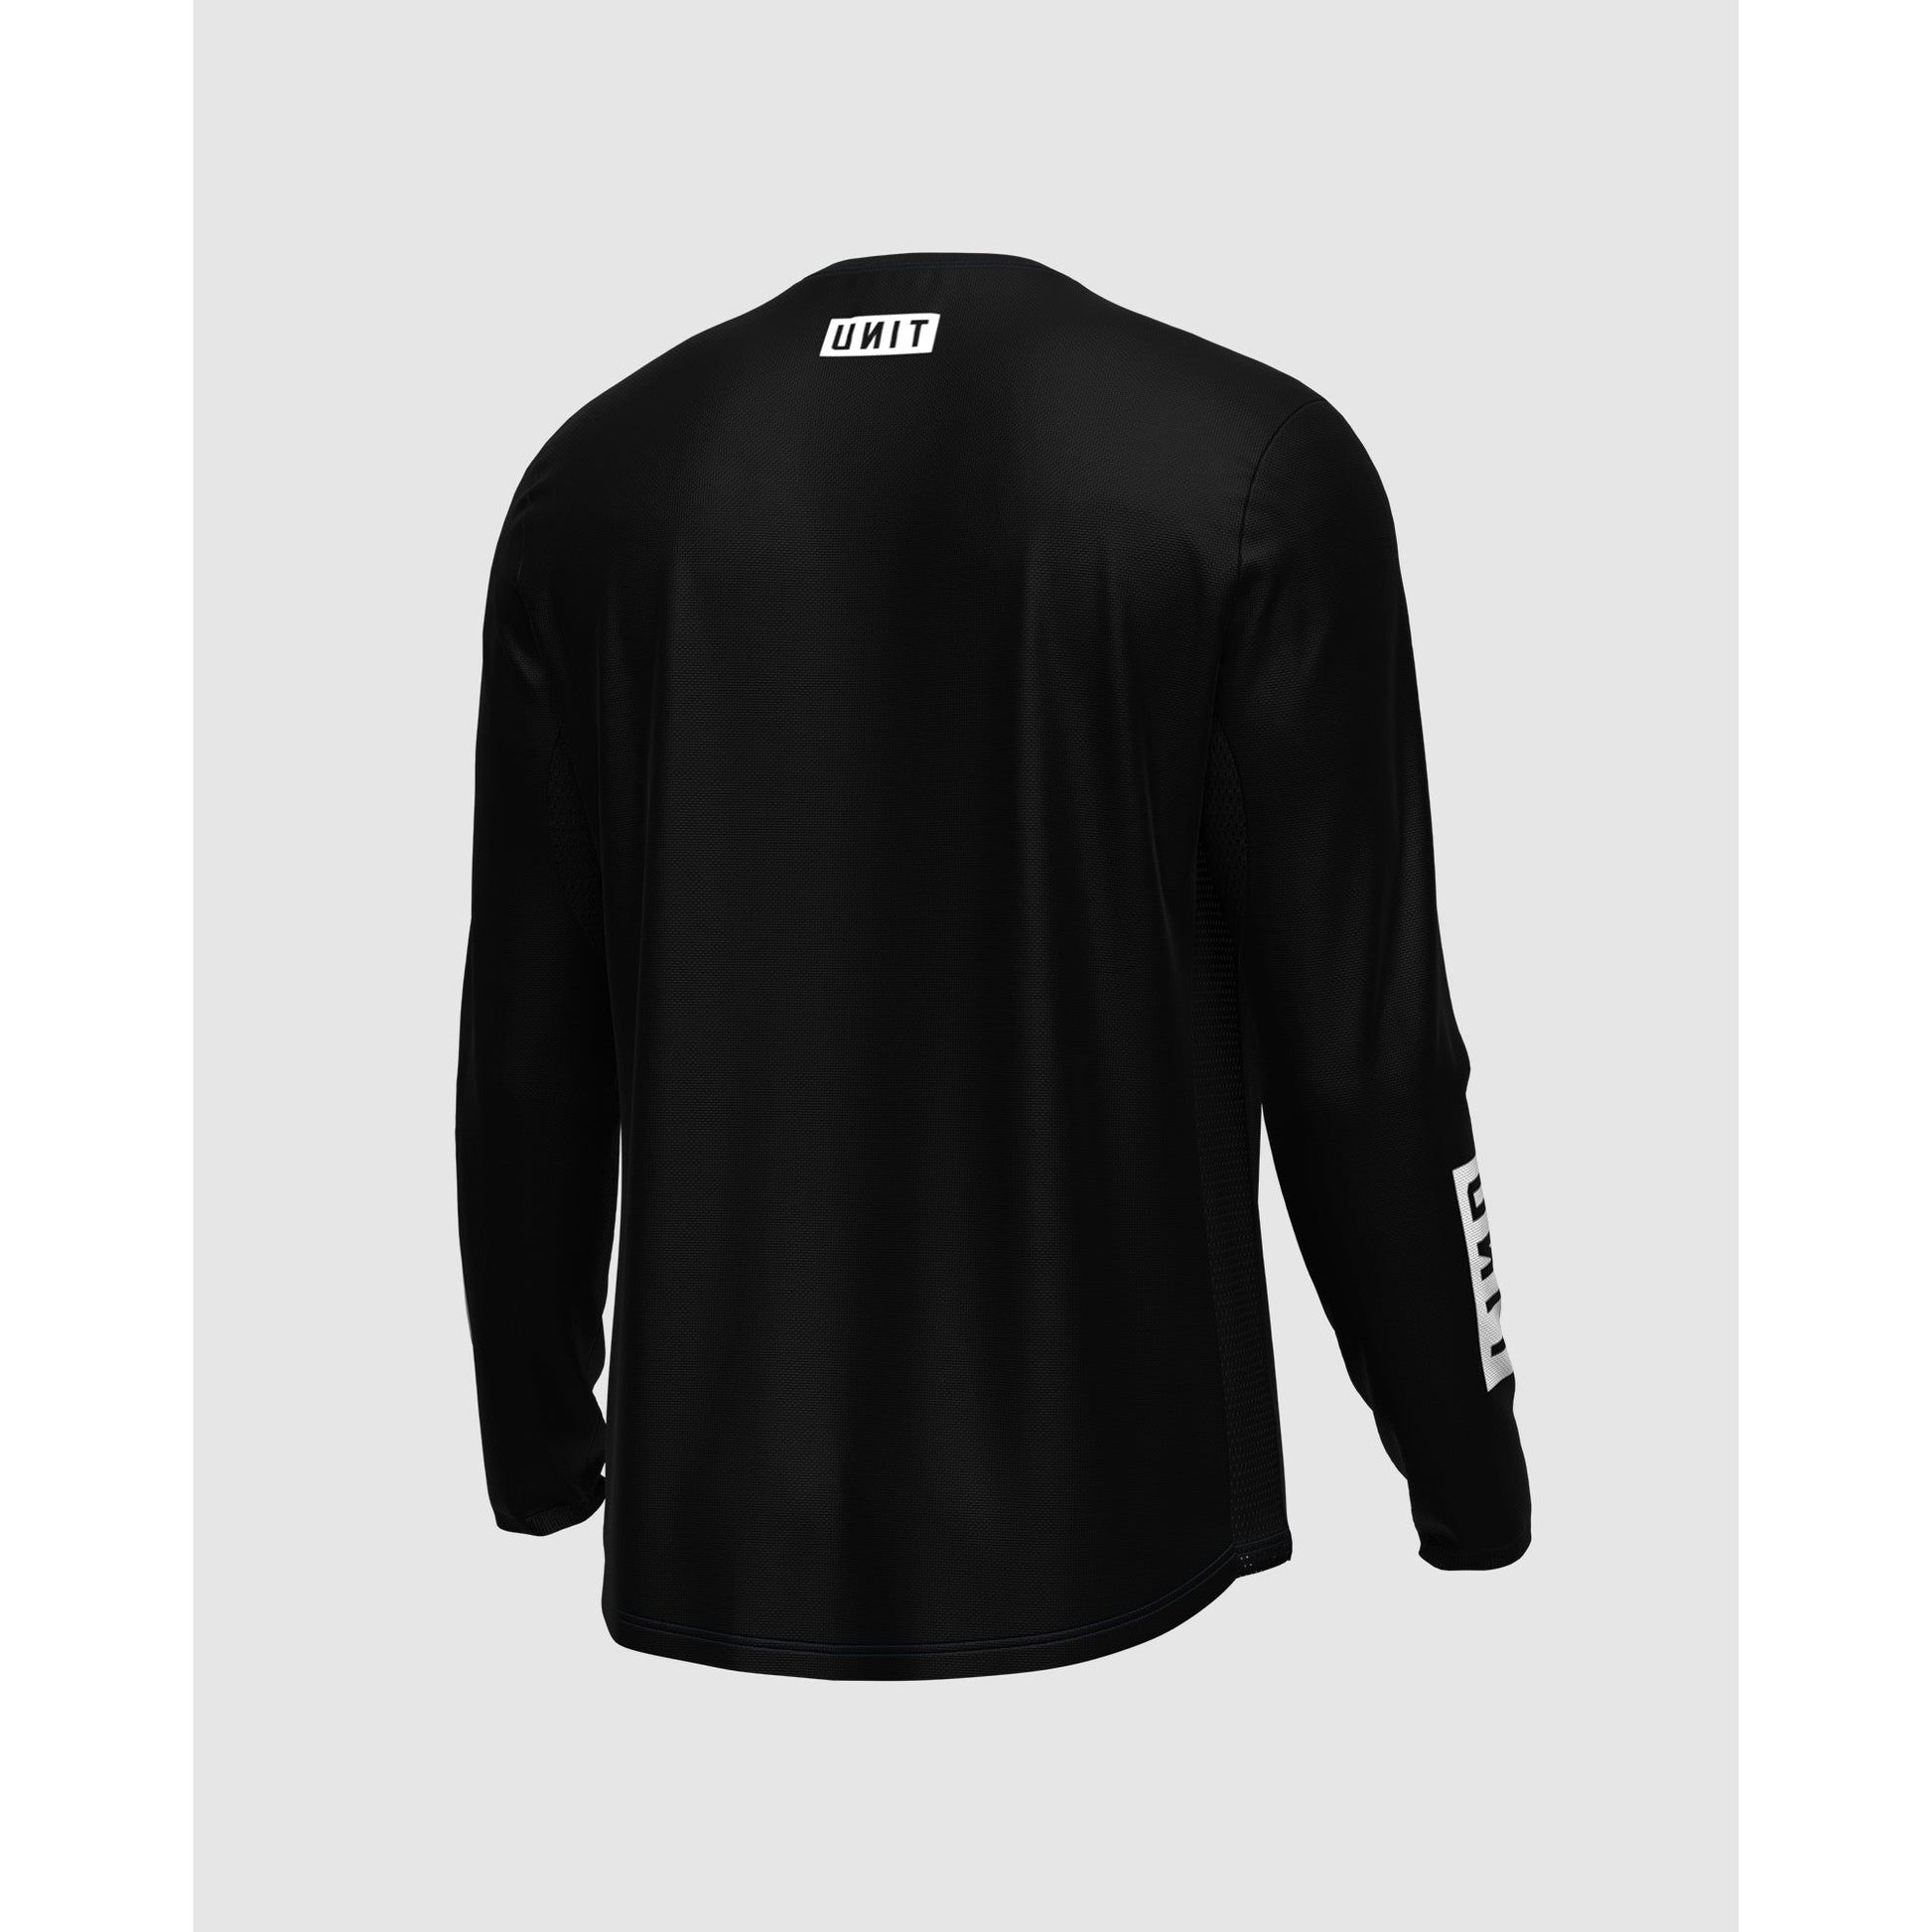 Unit Youth Long Sleeve Jersey - Youth L - Stack - Image 2